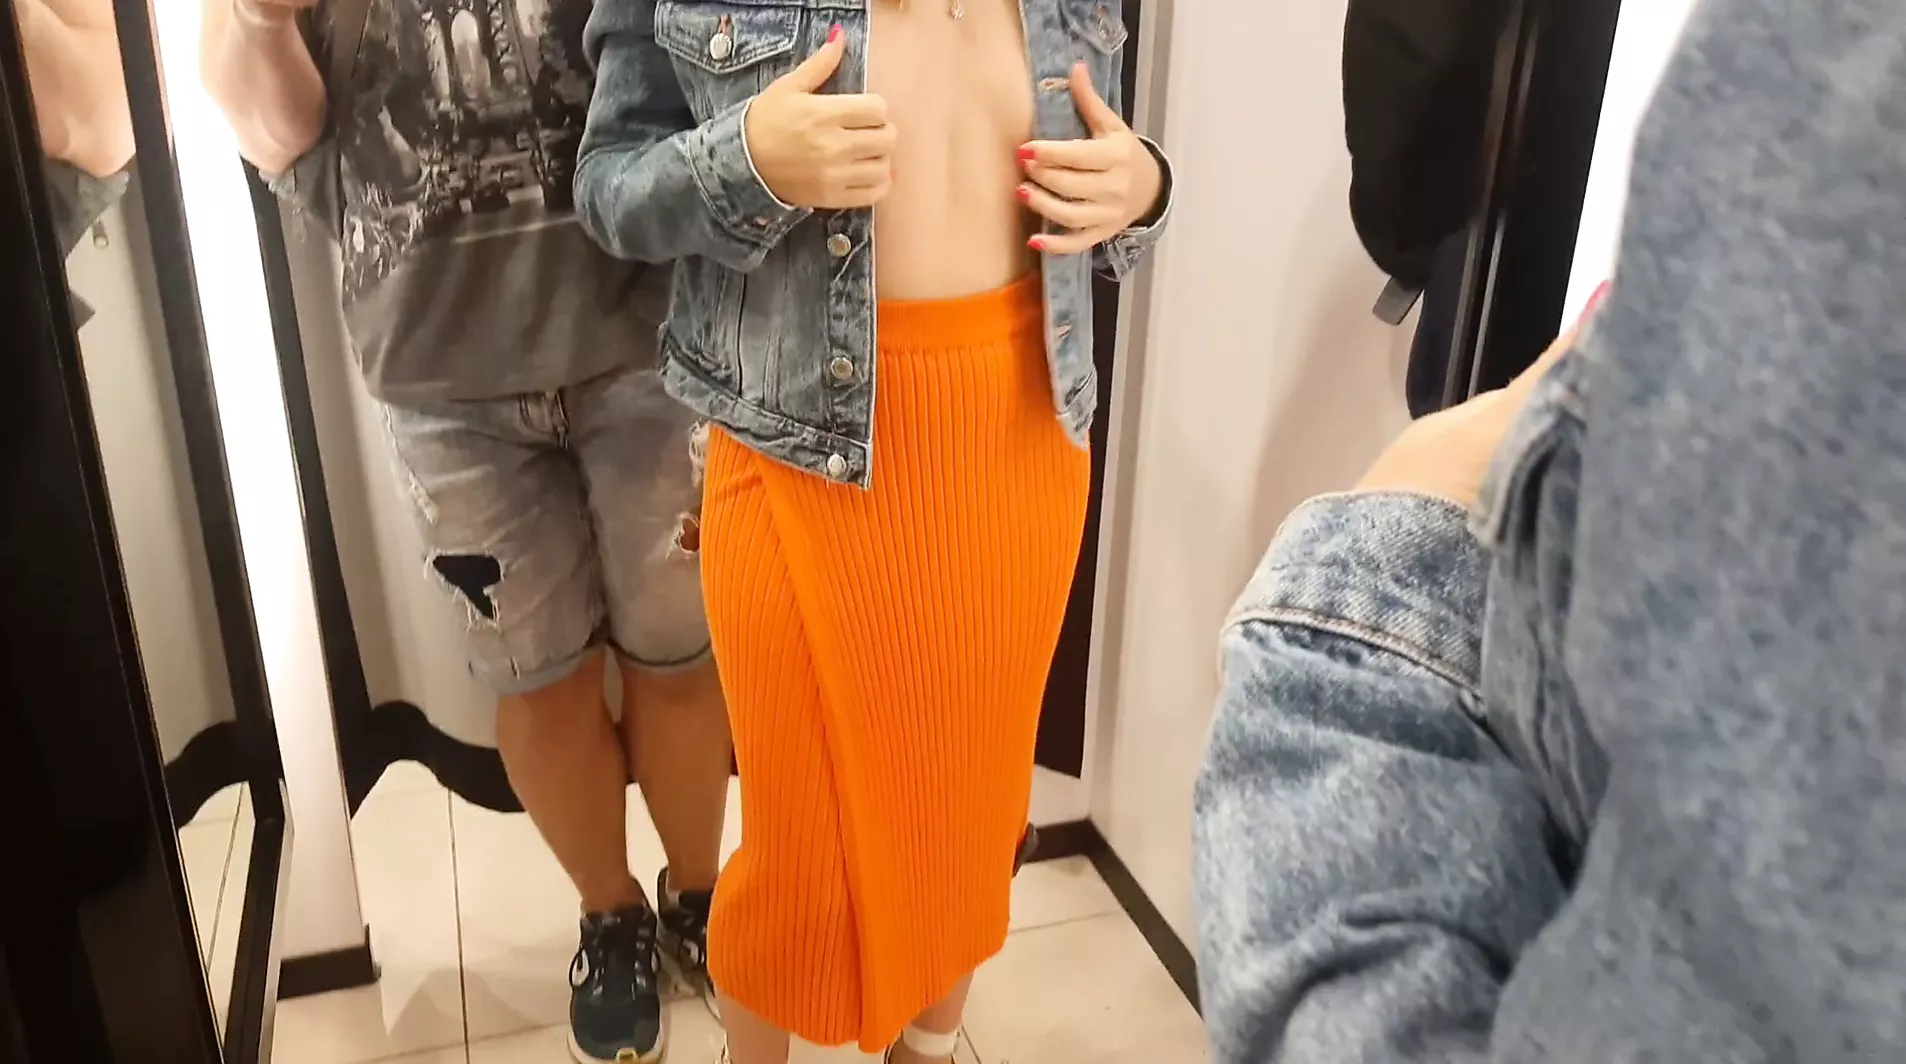 A Sexy Stranger Asked Me to look at her in the fitting Room